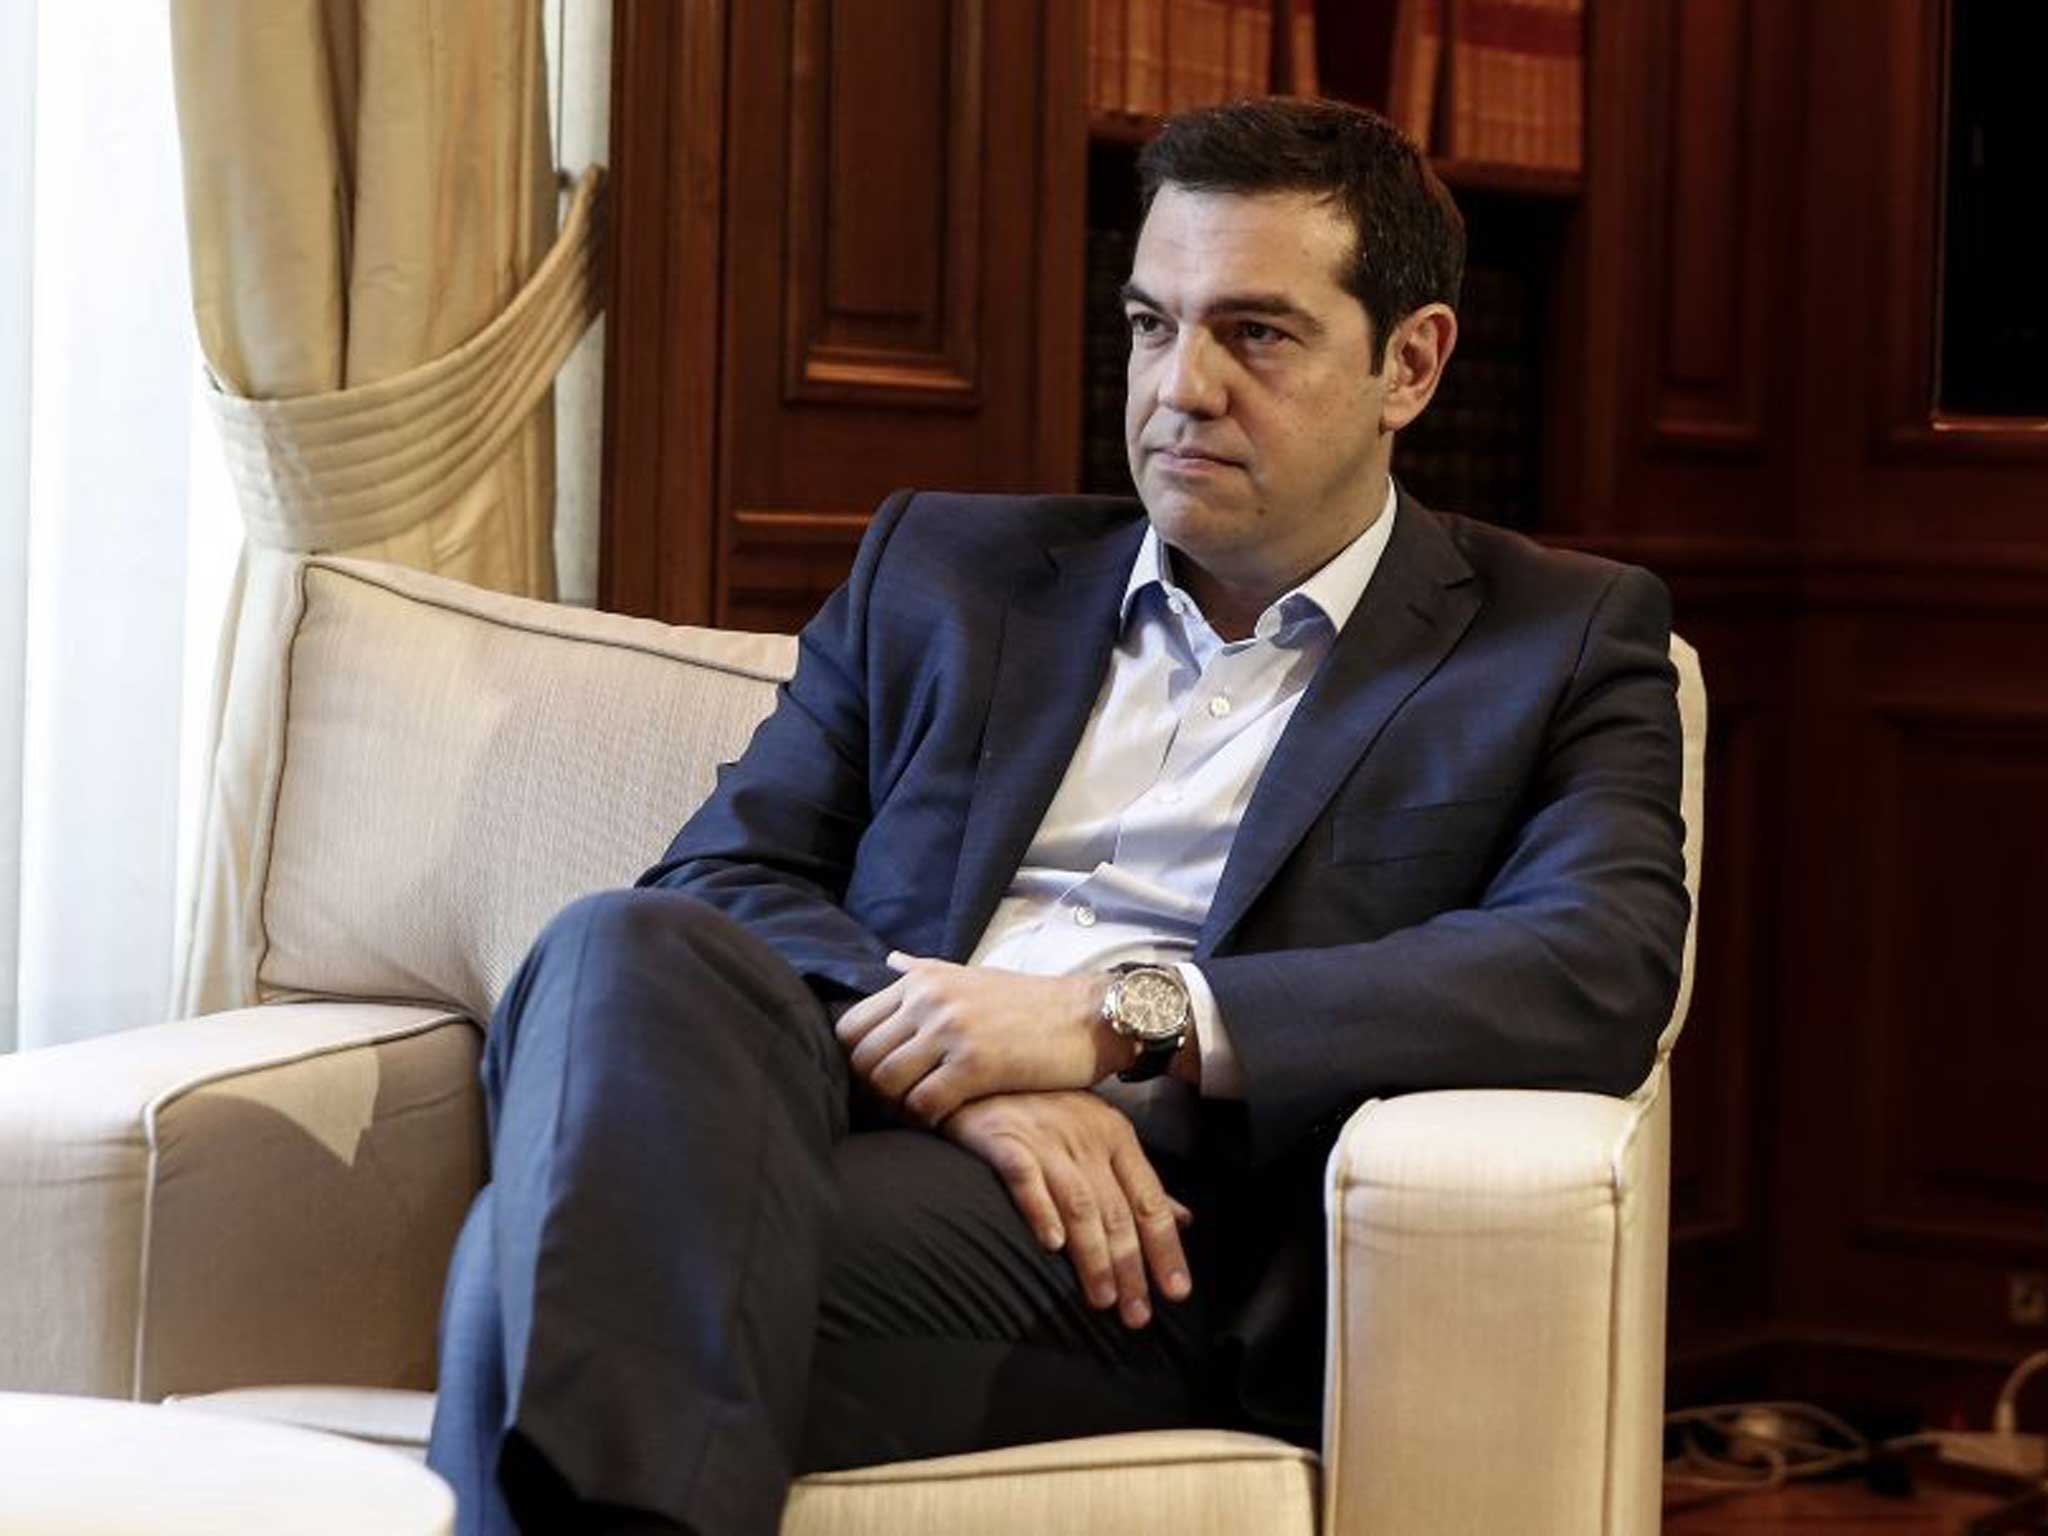 Greek PM Tsipras is not having a good time at the moment